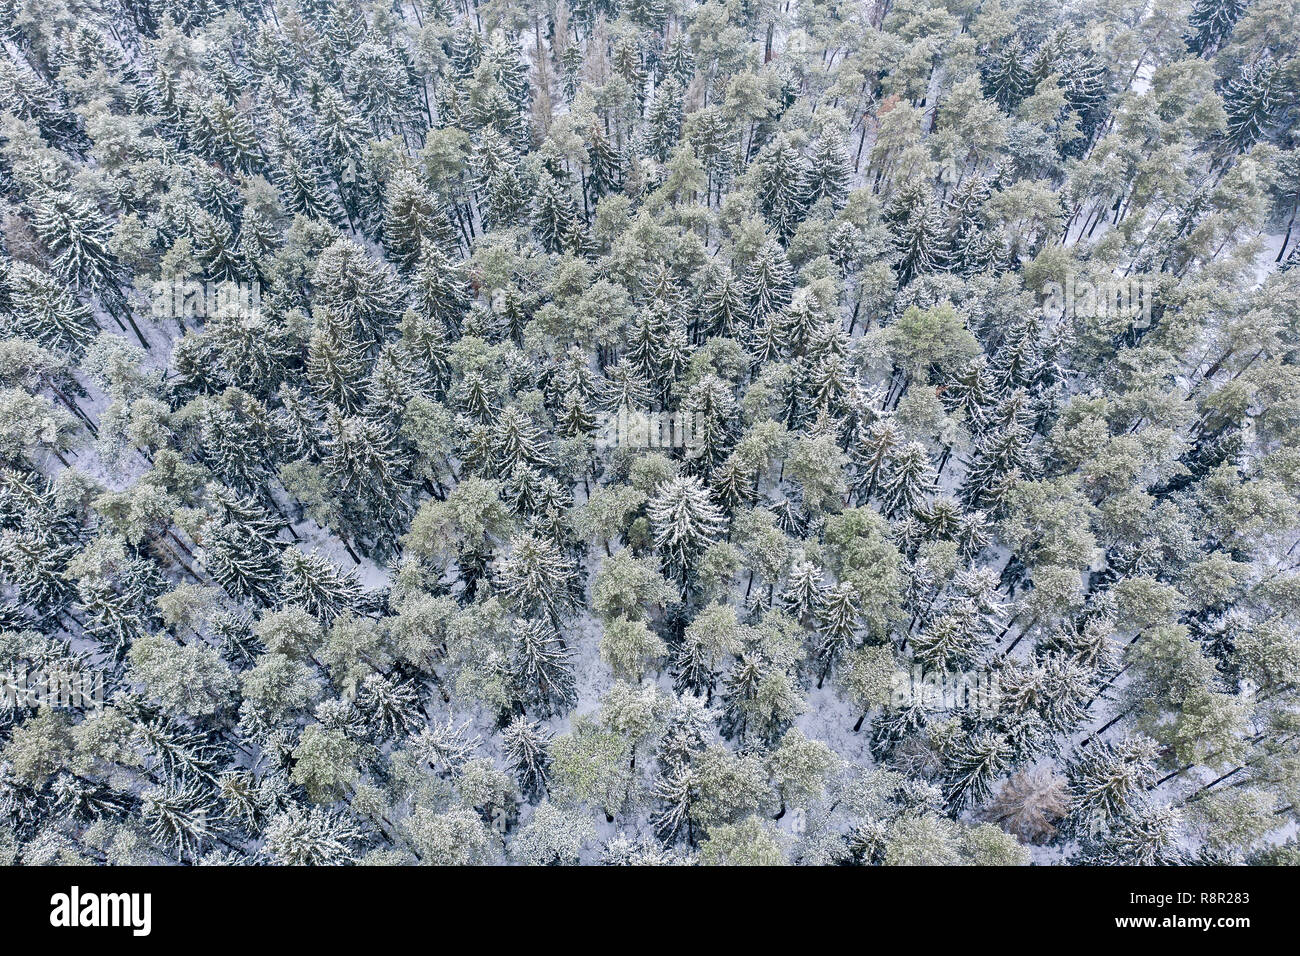 frozen pine and fir trees in the snow in winter. christmas background. winter snowy forest bird's eye view Stock Photo